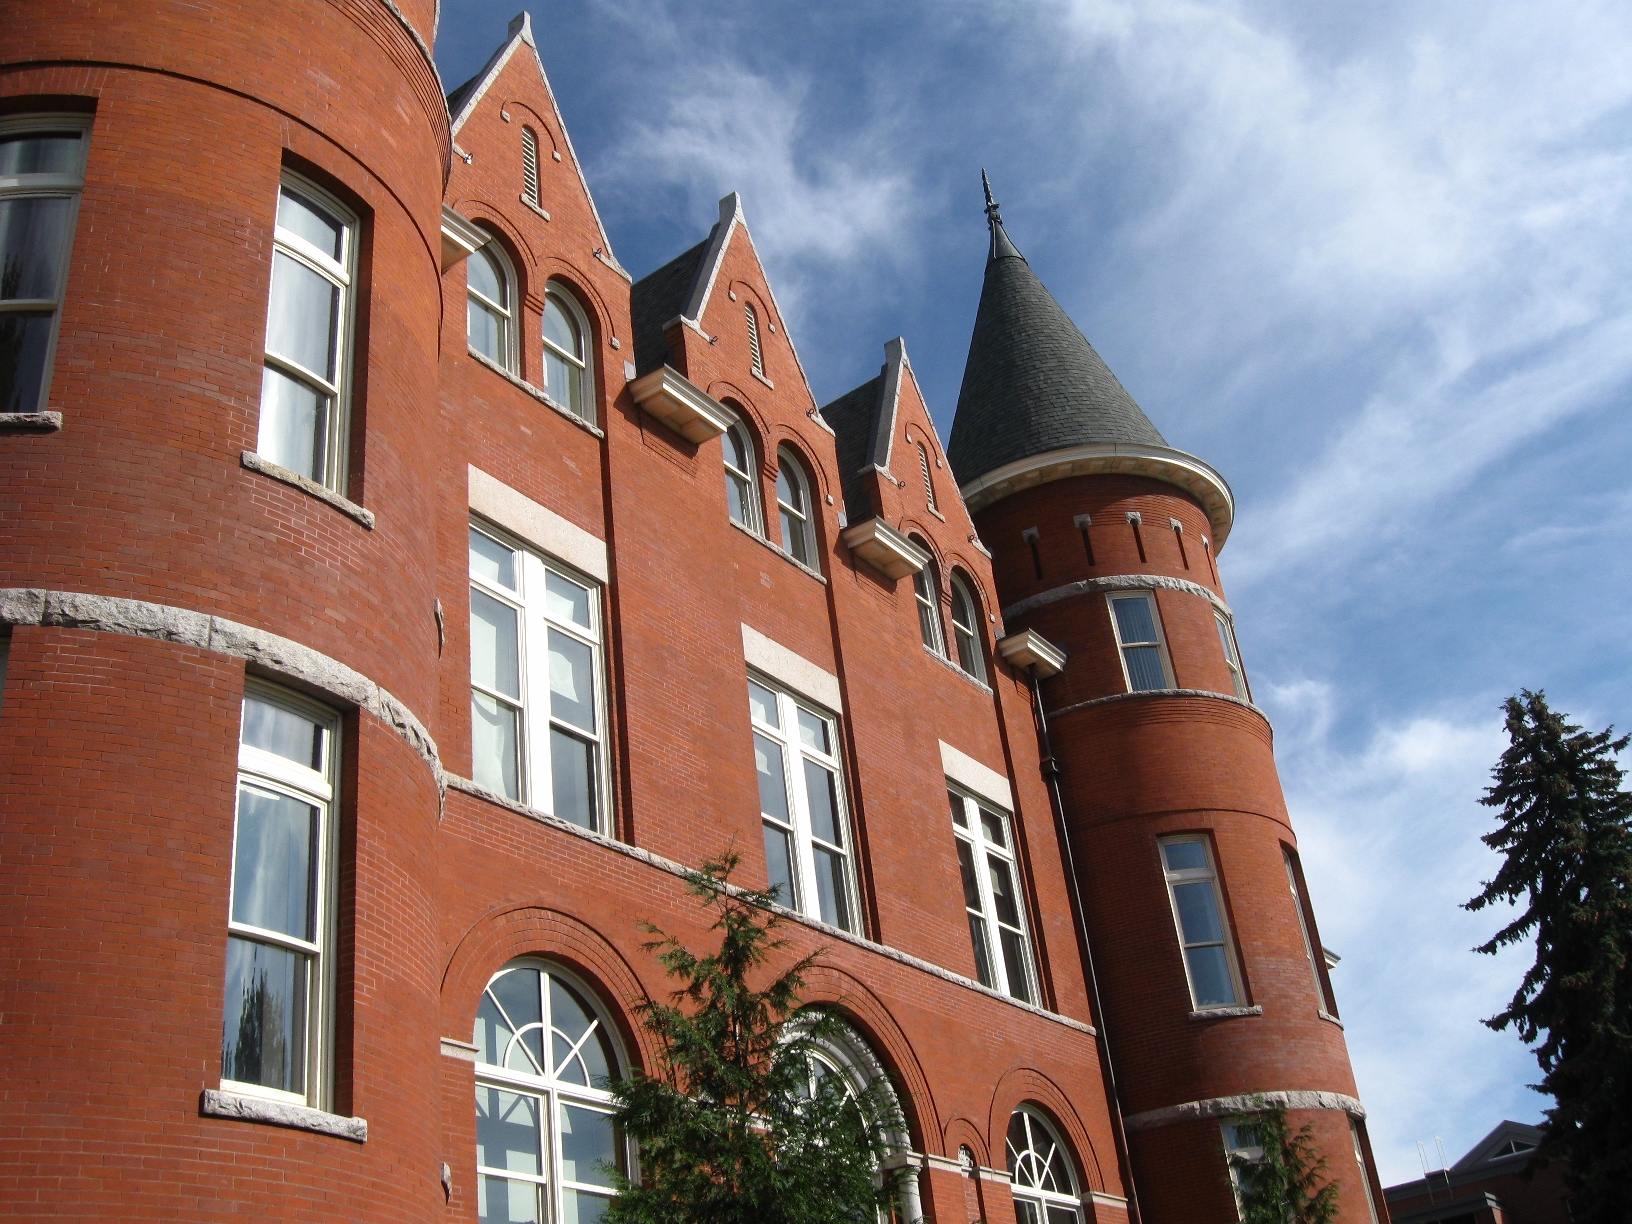 a close up of a large red brick building with a clock tower